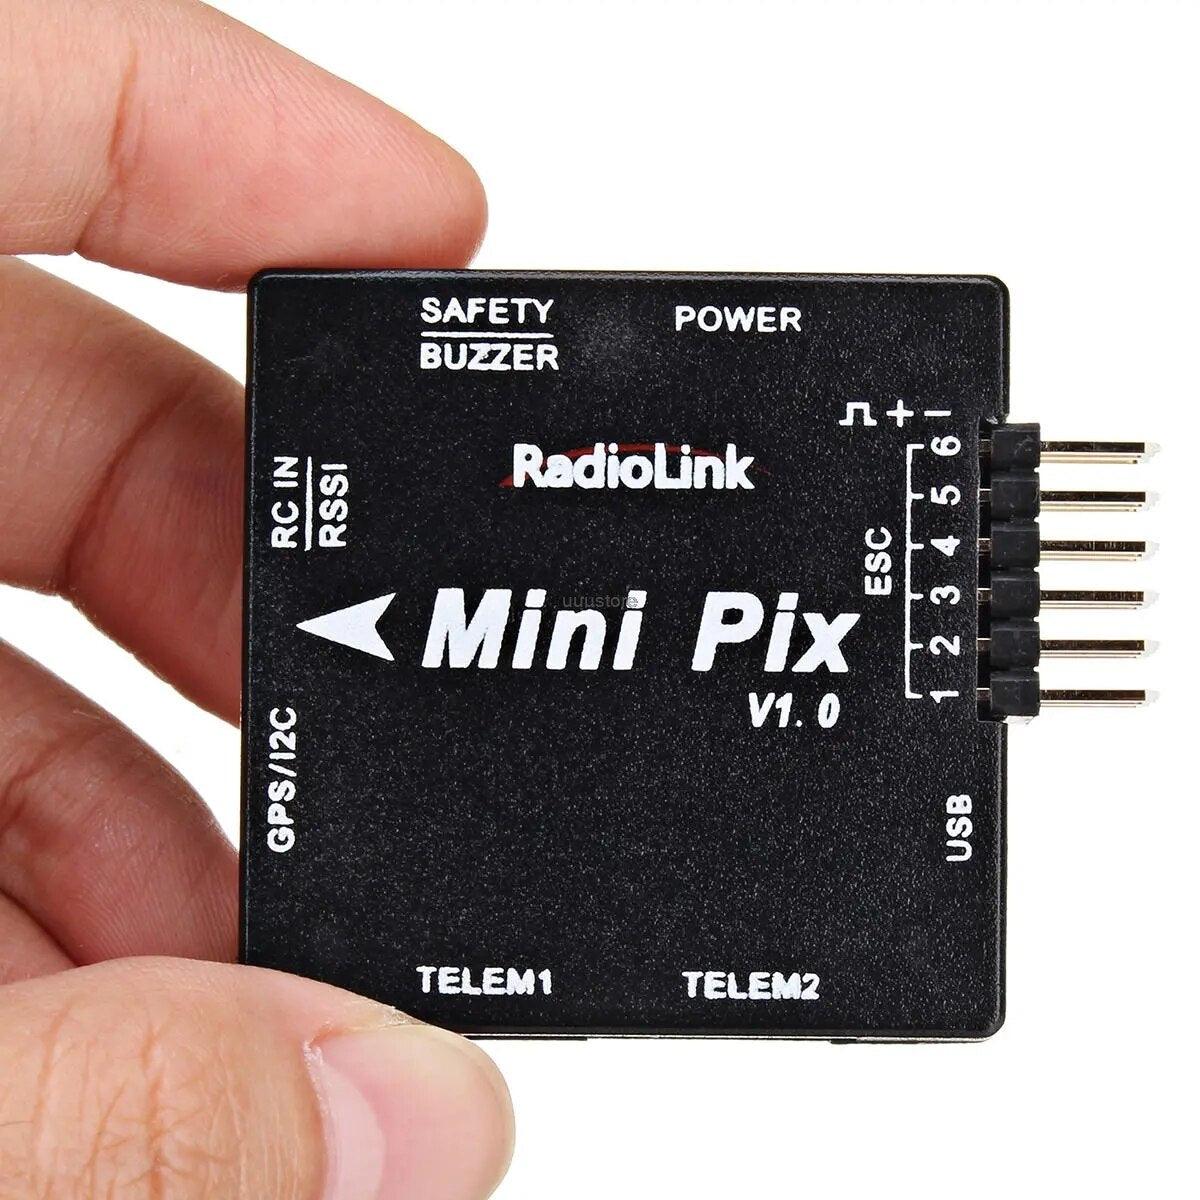 Radiolink Mini PIX M8N GPS Flight Controller - Vibration Damping by Software Atitude Hold for RC Racer Multicopter Drone - RCDrone